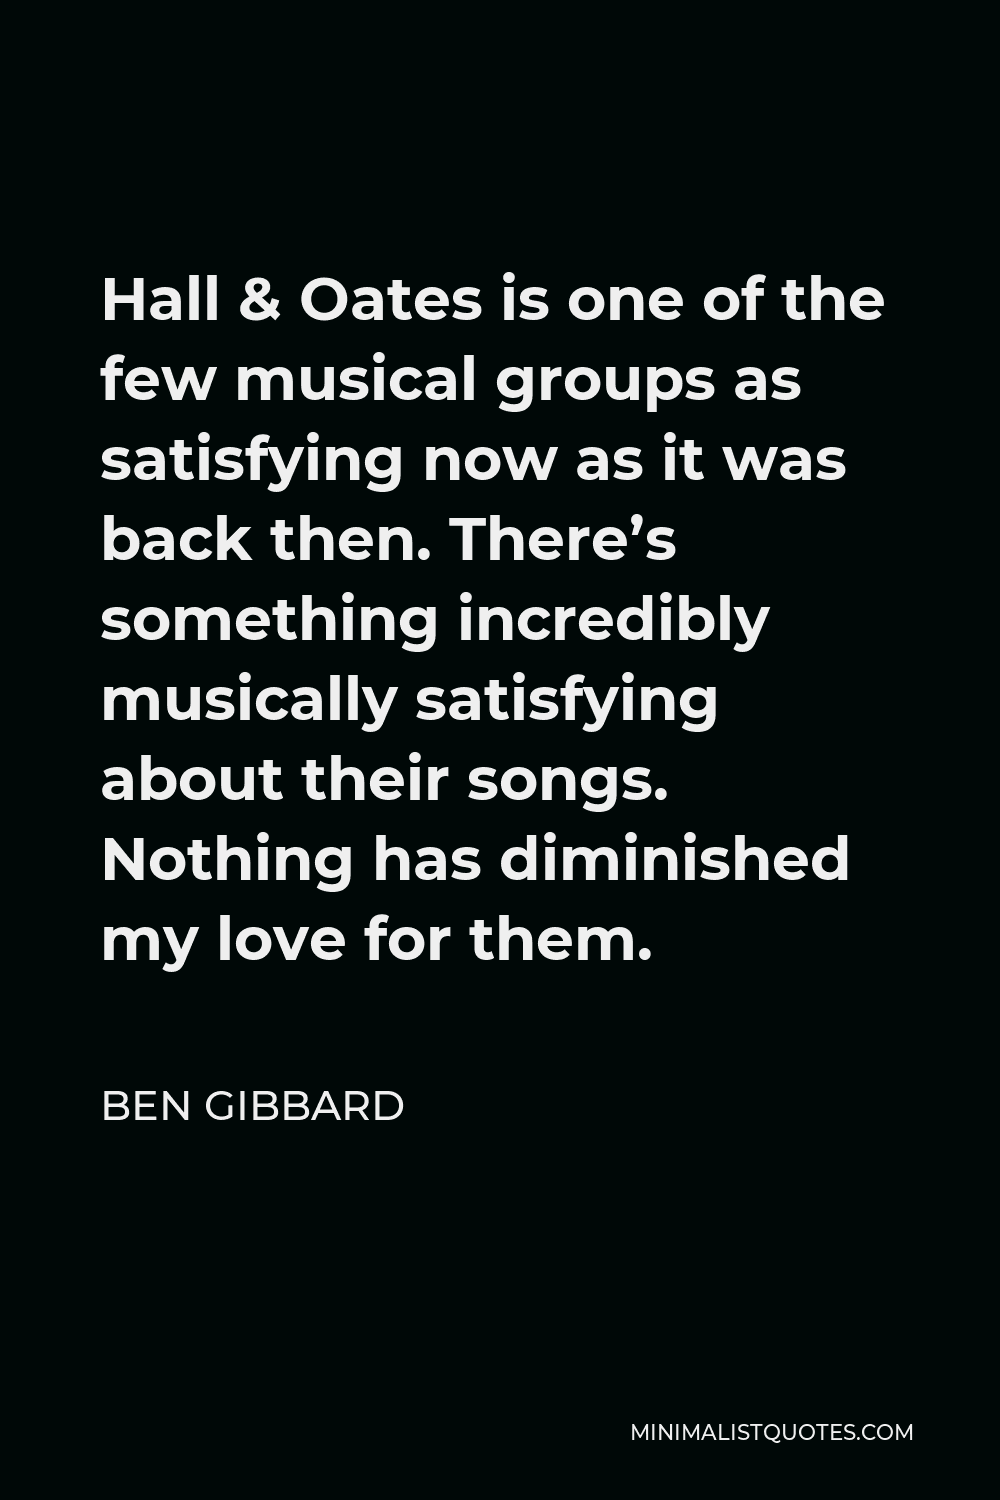 Ben Gibbard Quote - Hall & Oates is one of the few musical groups as satisfying now as it was back then. There’s something incredibly musically satisfying about their songs. Nothing has diminished my love for them.